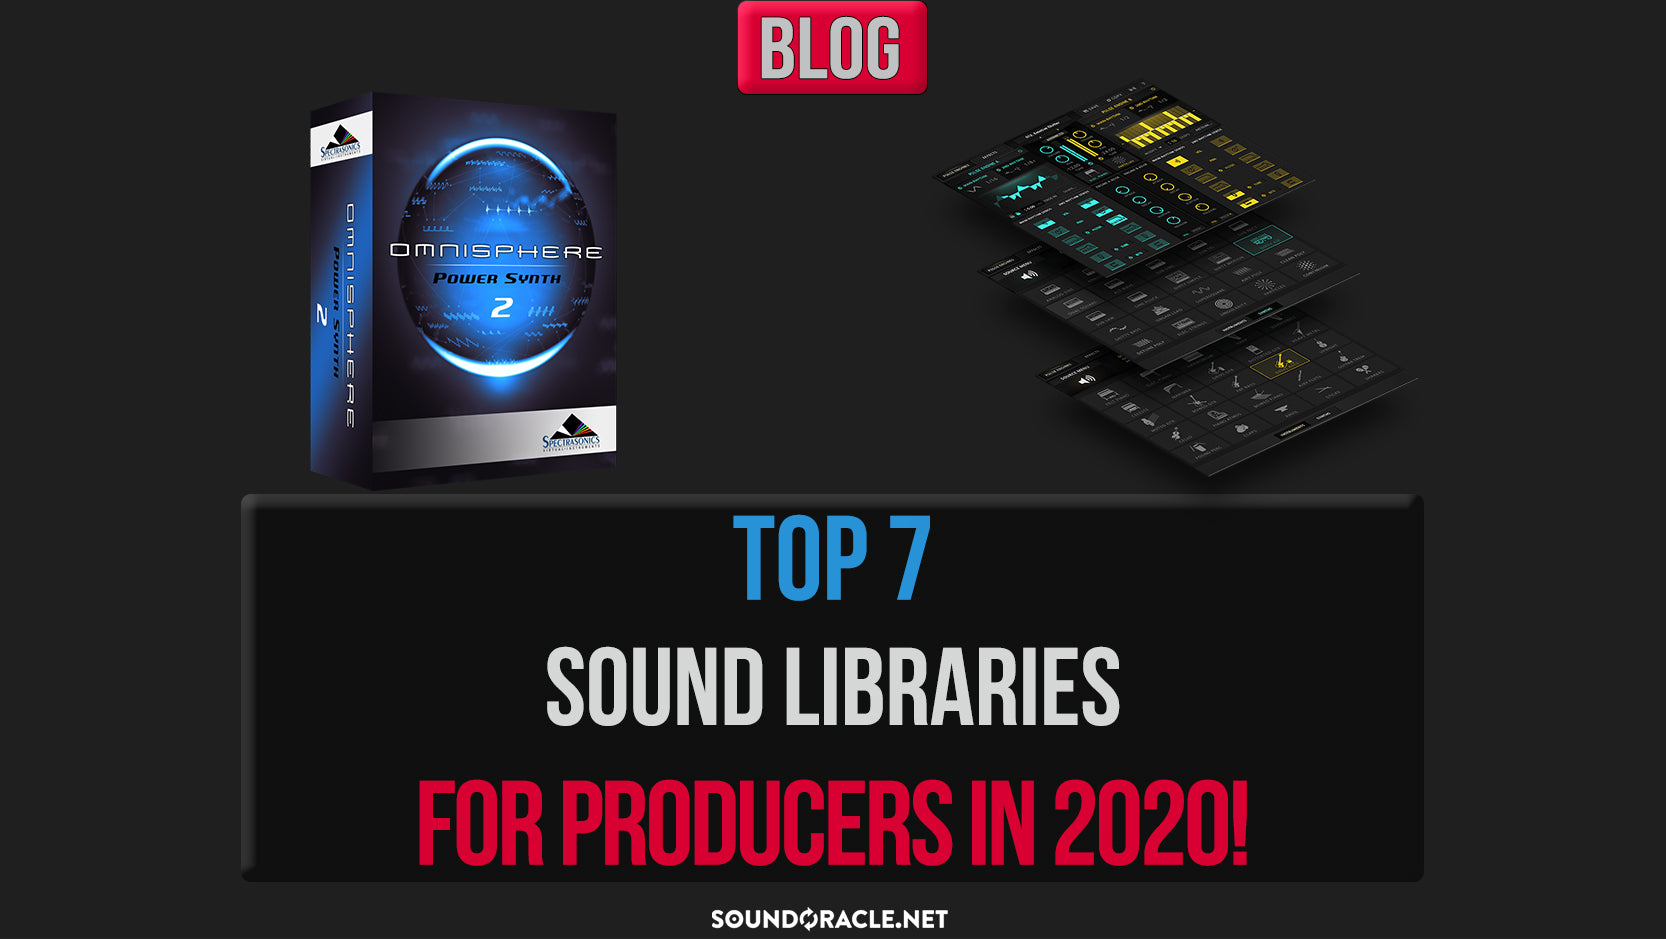 Top 7 Sound Libraries for Producers In 2020!